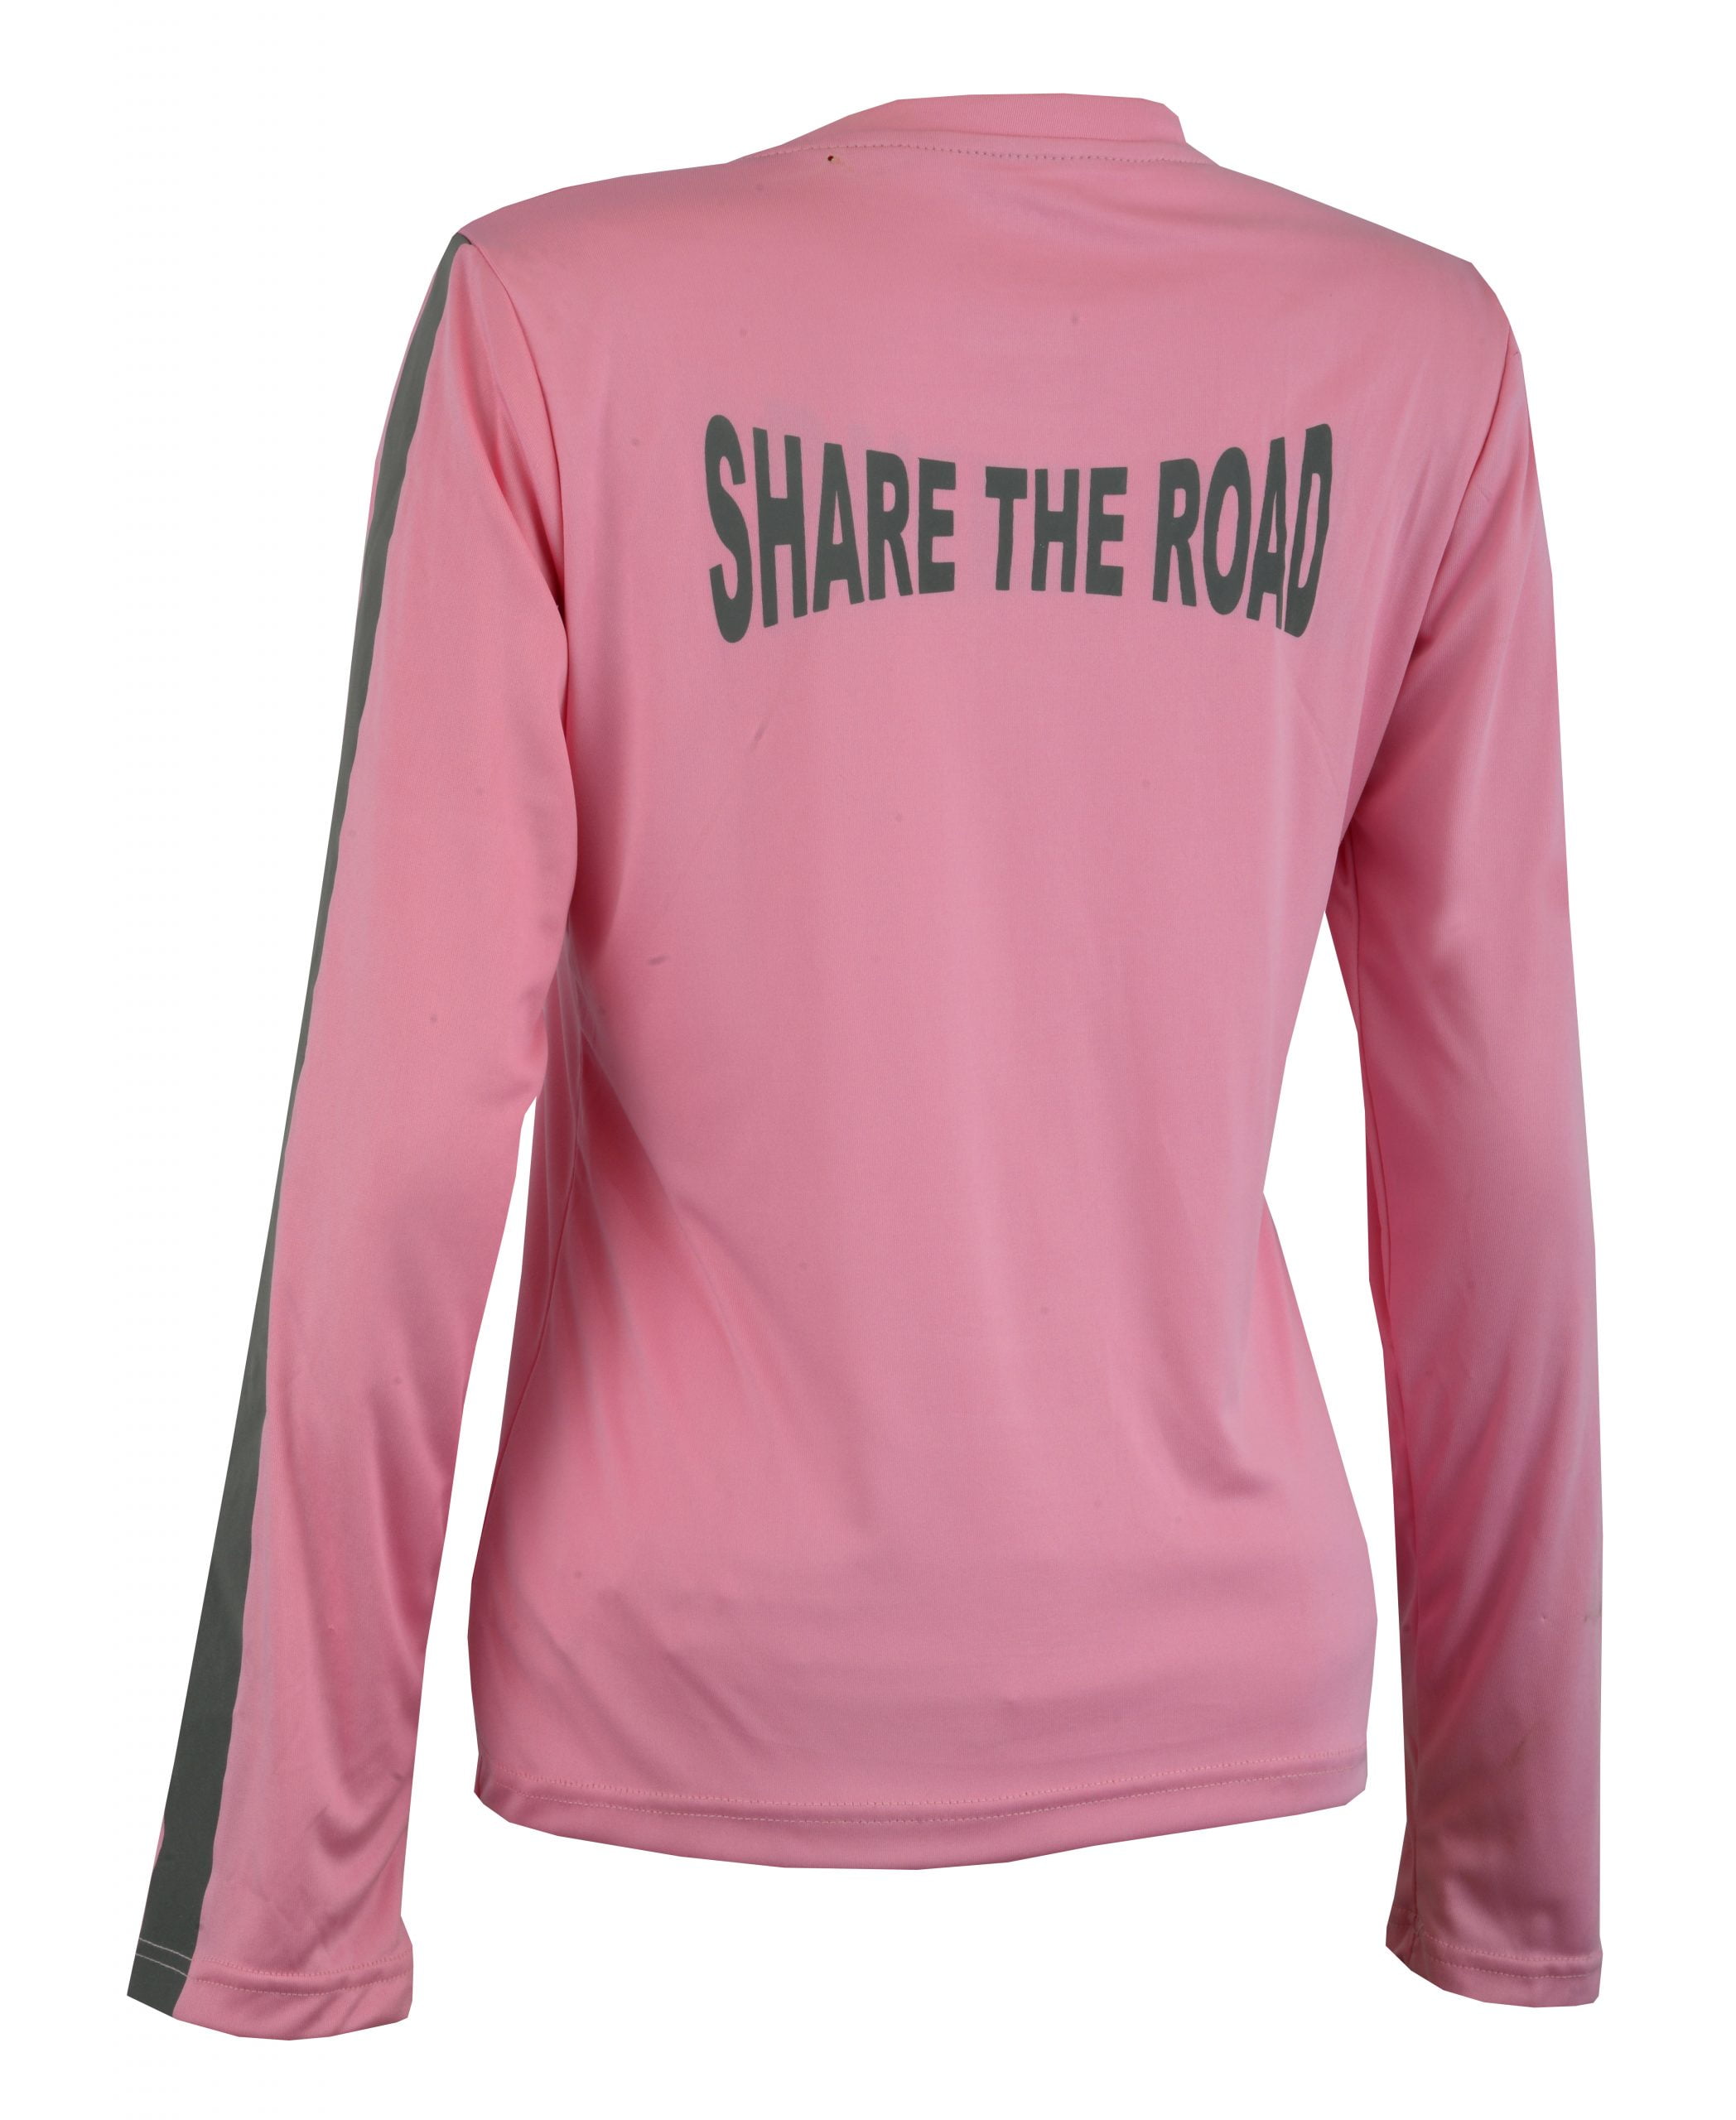 Women's Reflective Shirt -Share the Road-Pink